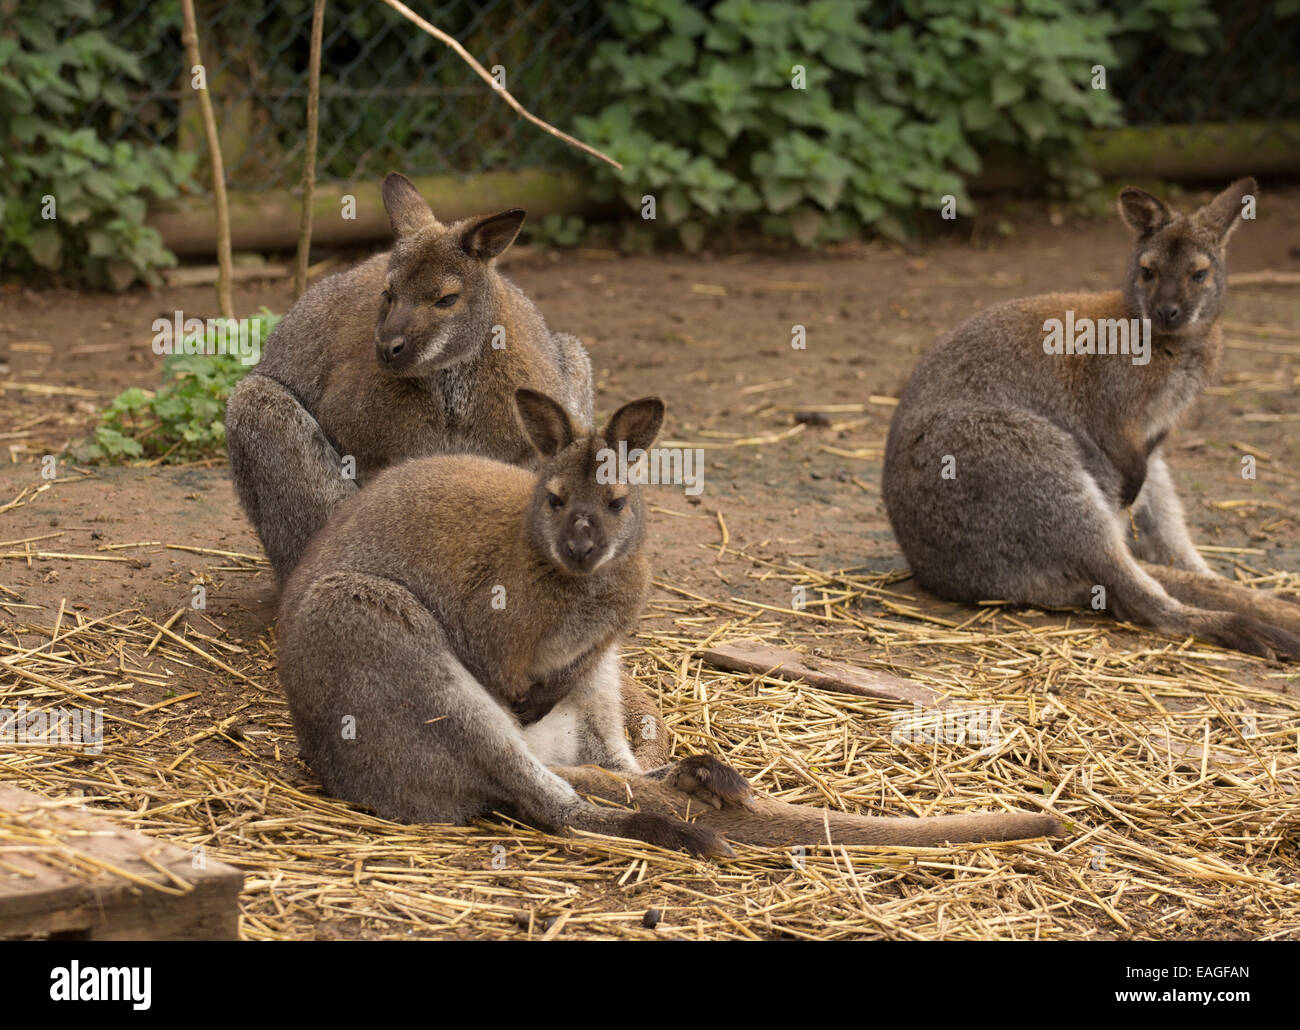 Group of Wallabies sitting Stock Photo